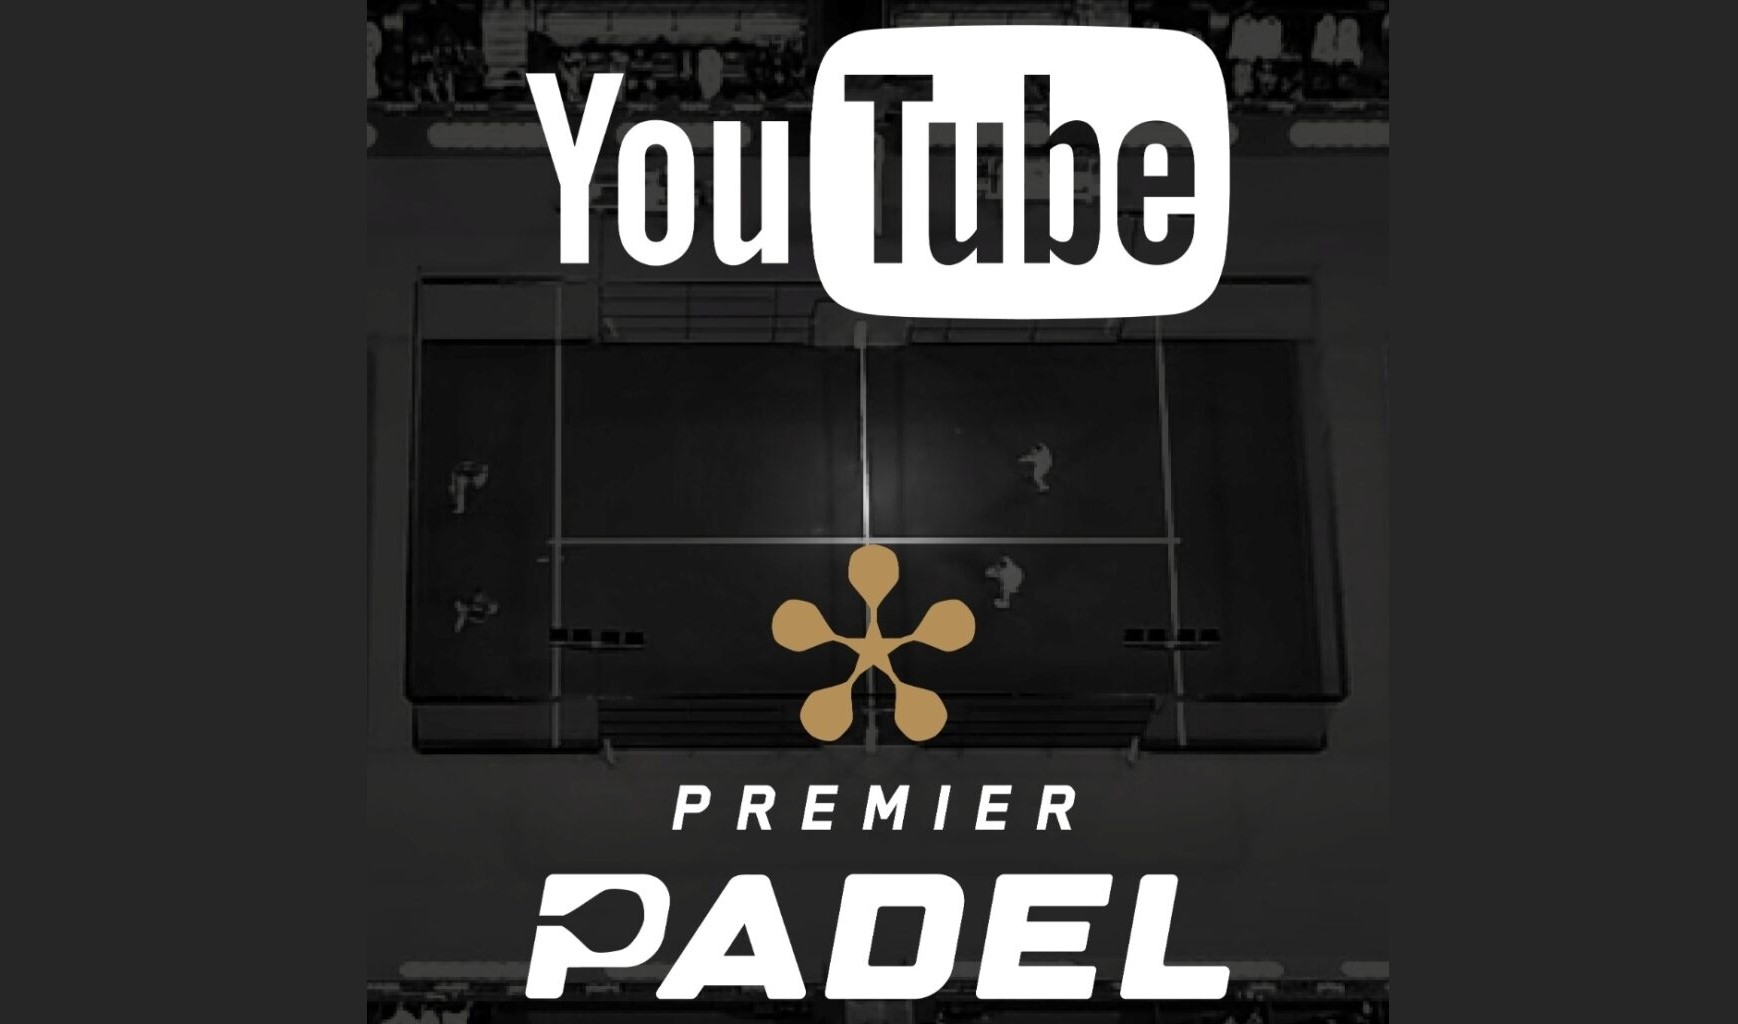 Premier Padel aired on Youtube in Spain